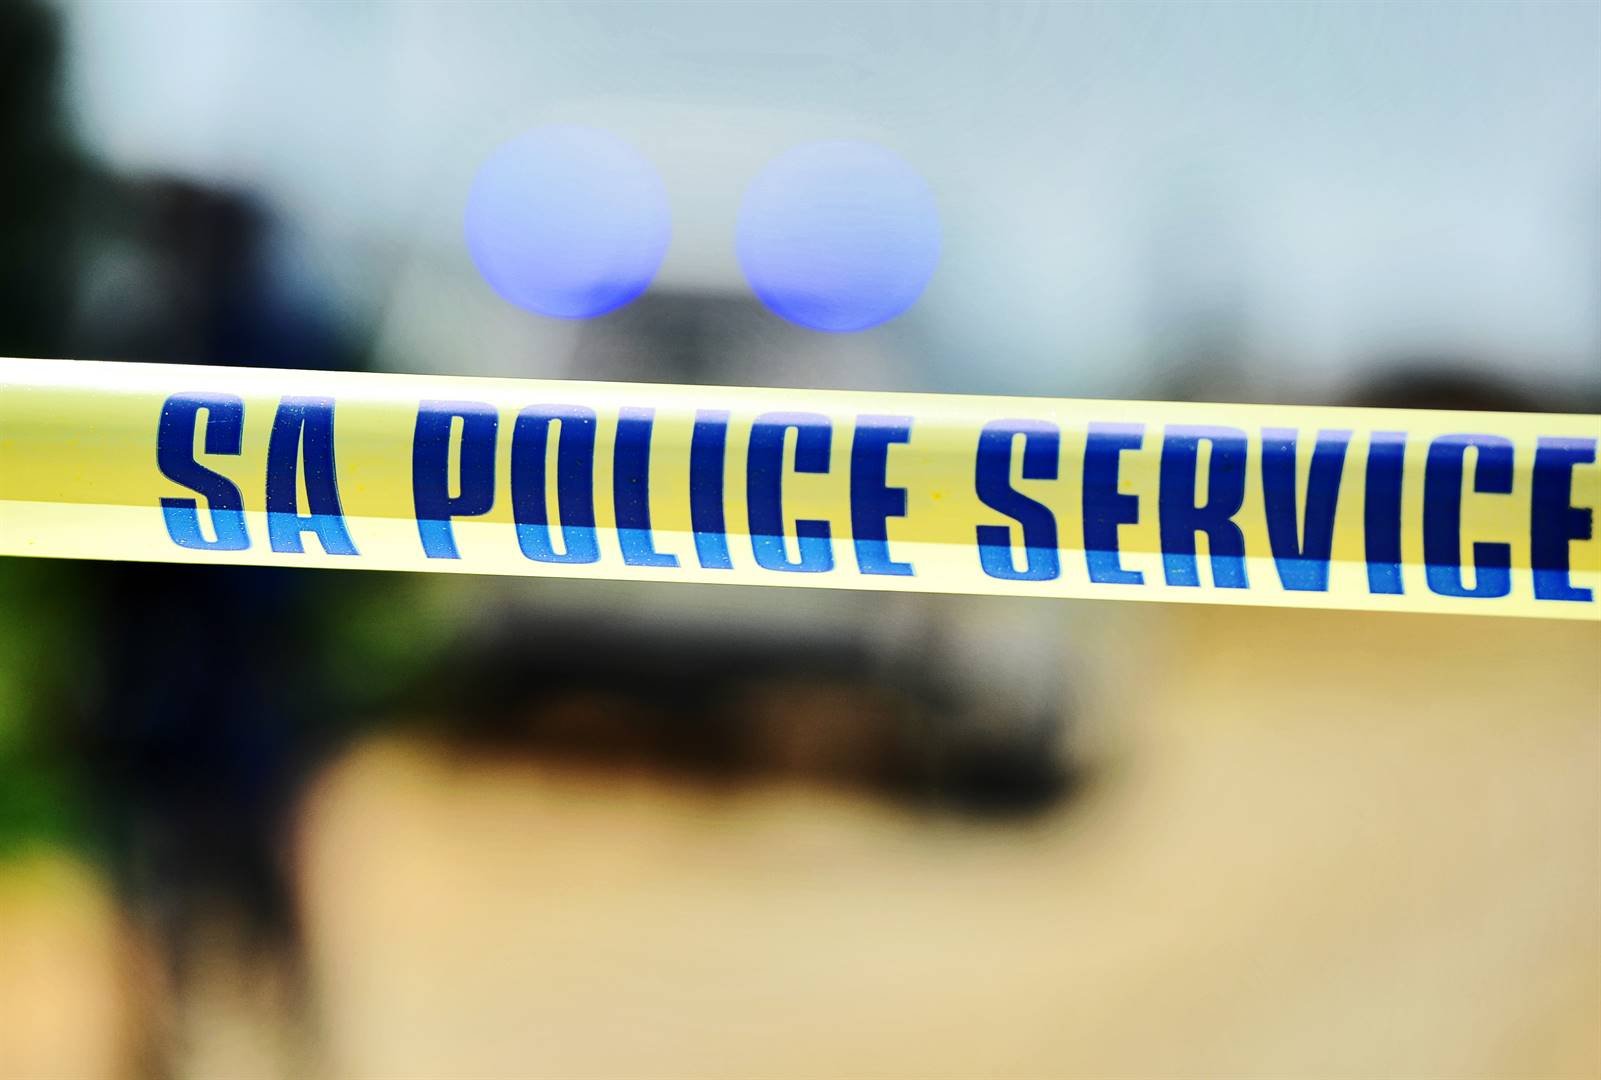 A 19-year-old suspect was arrested after allegedly going on a two-day shooting spree in the Eastern Cape.